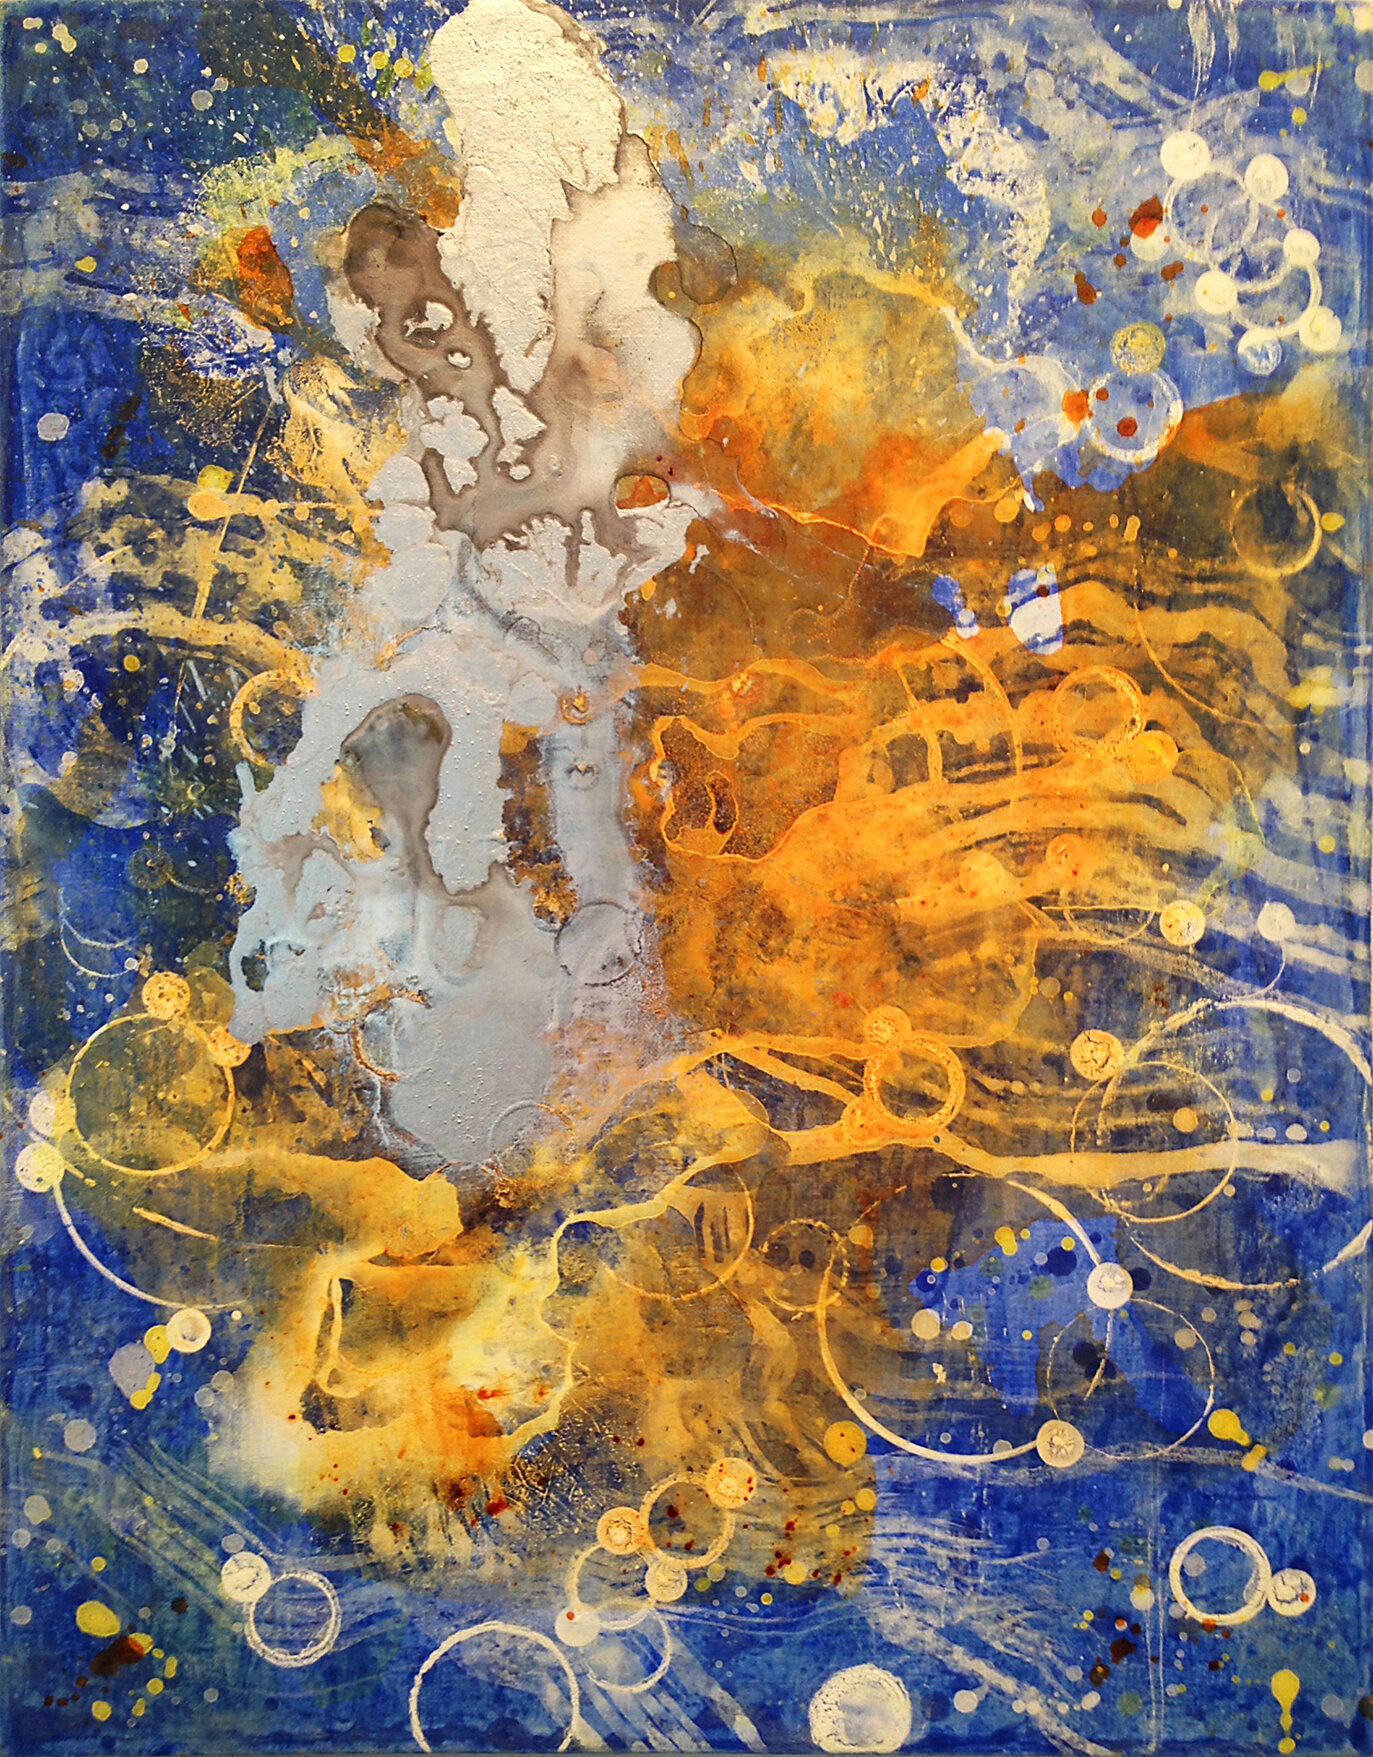   Alchemical Pour , 2012, acrylic on canvas, 18 x 14 inches, Private Collection, Davis, CA  